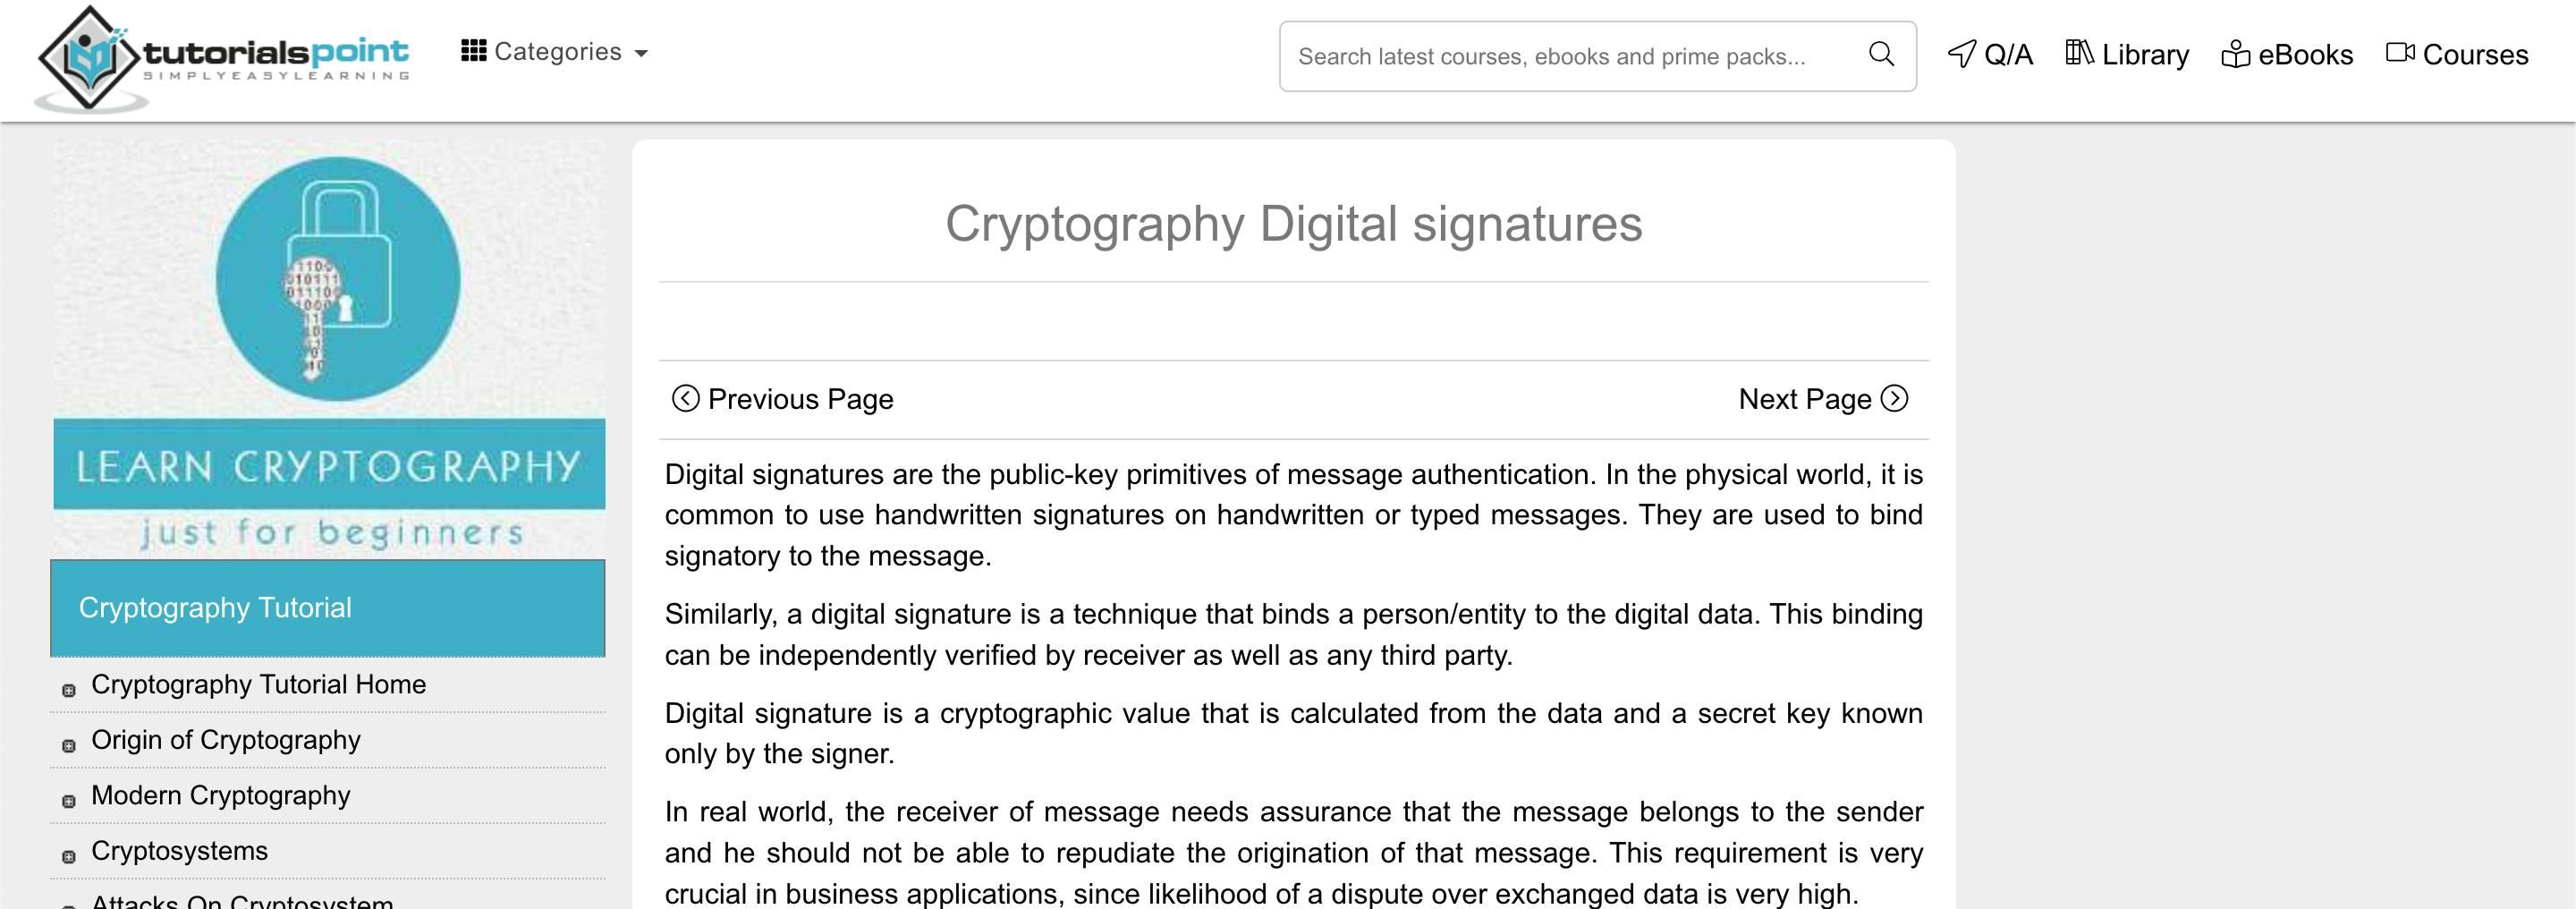 Cryptography Digital signatures